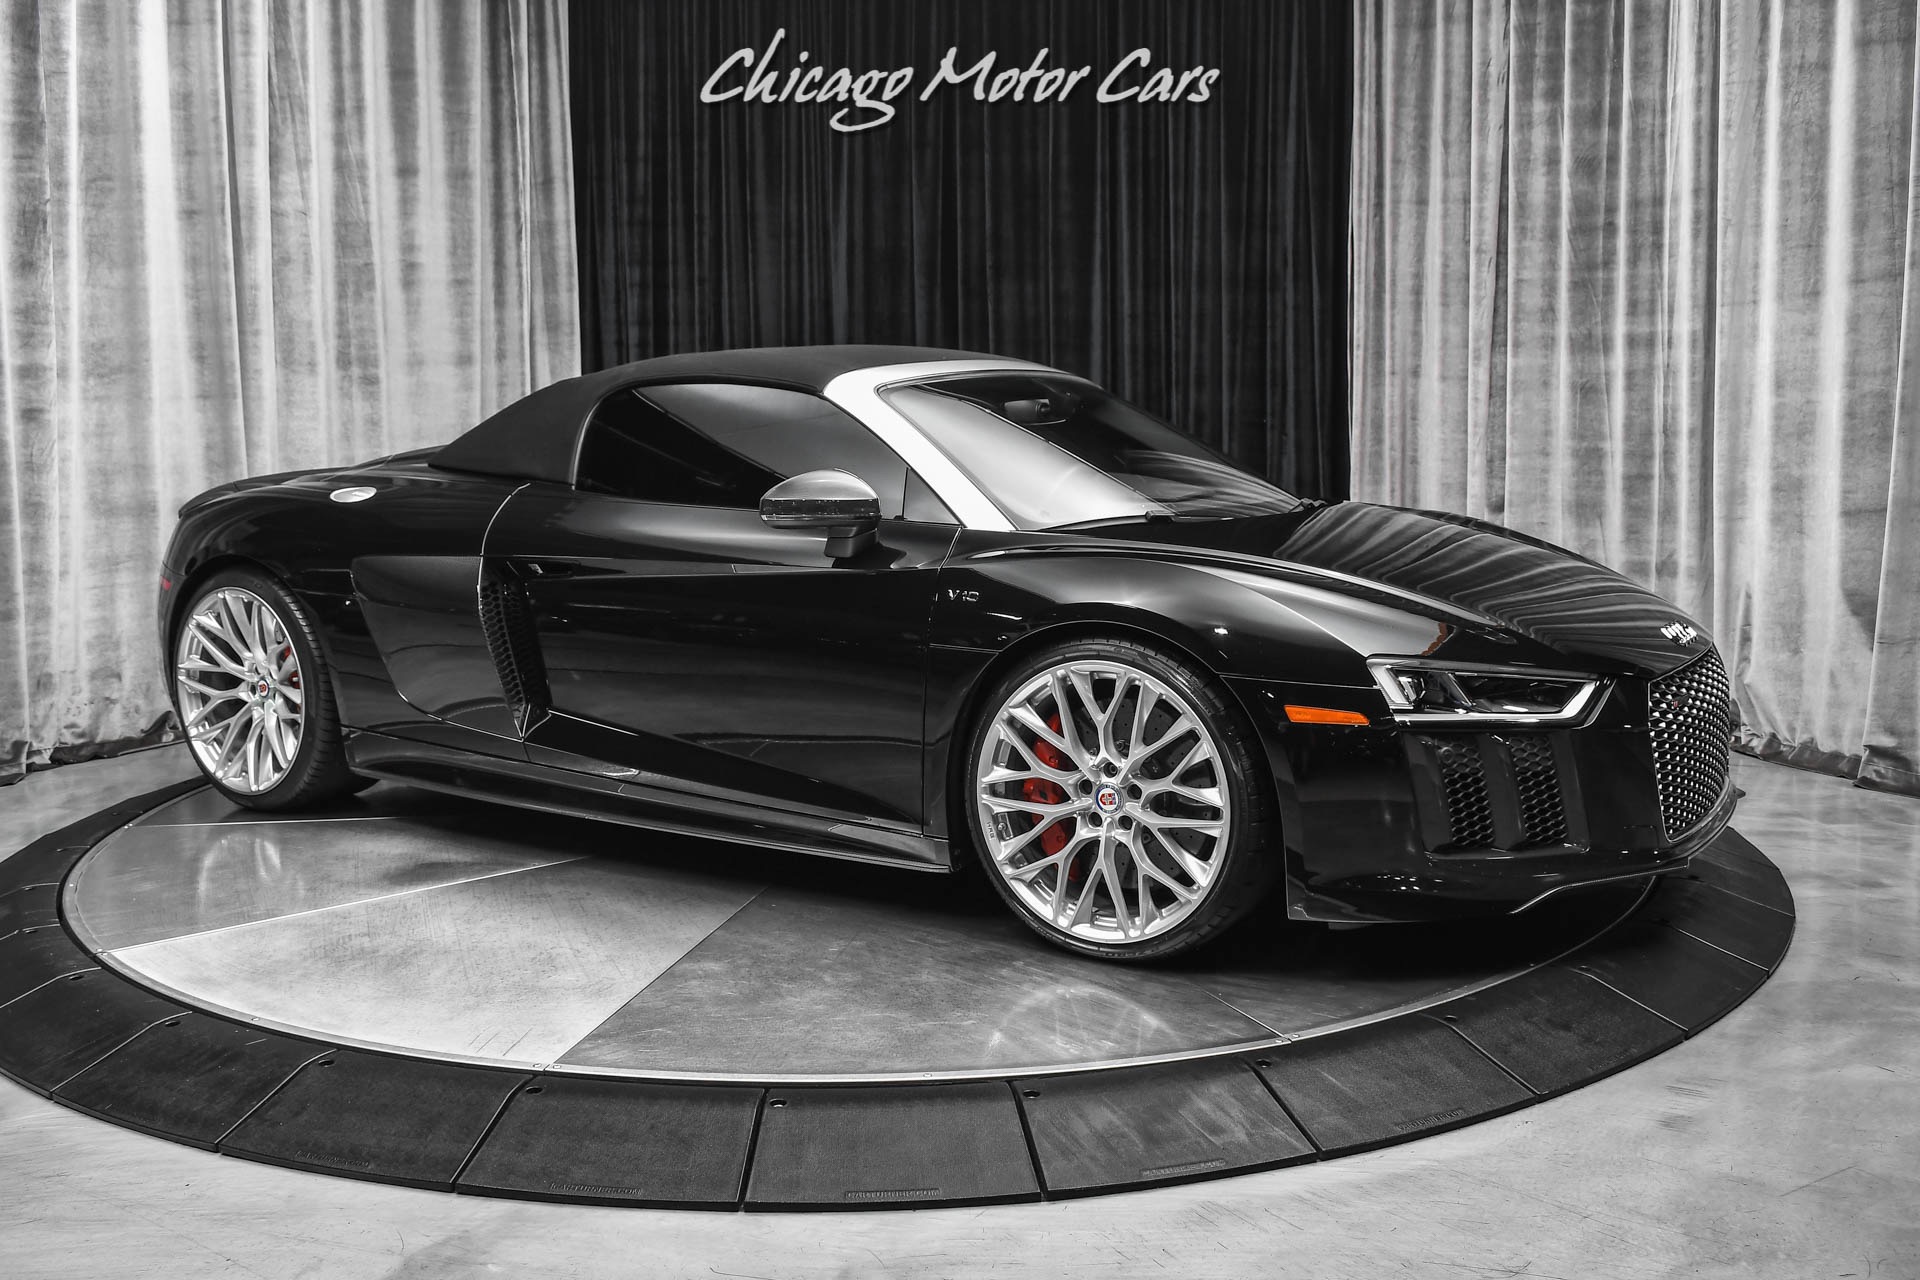 Used-2018-Audi-R8-52-quattro-V10-Plus-Spyder-Convertible-LOW-Miles-TONS-of-Carbon-HRE-Wheels